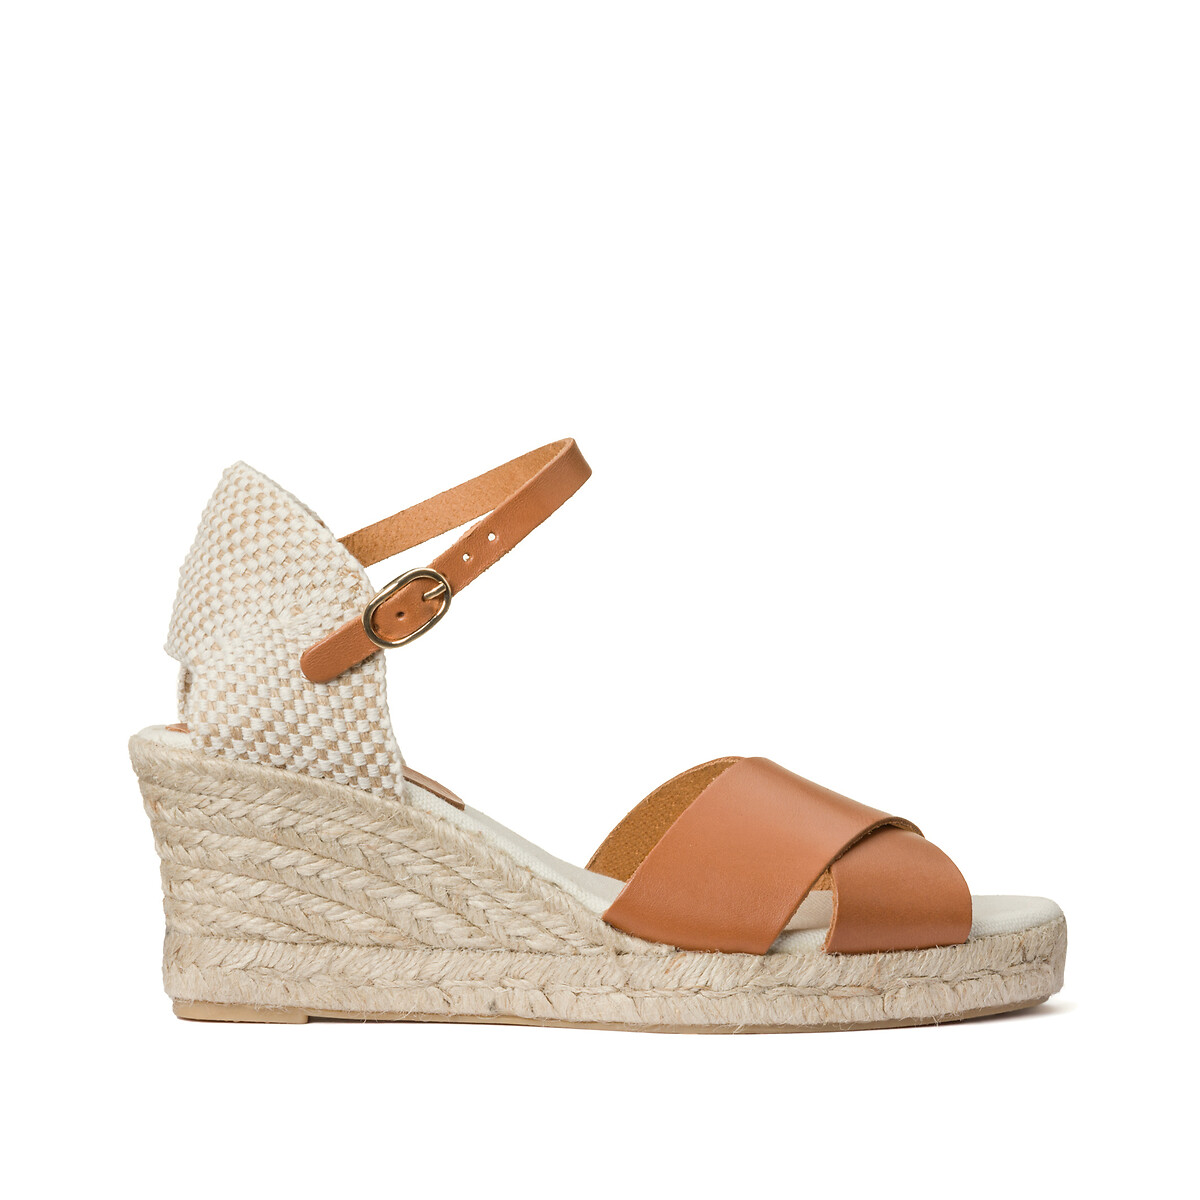 Leather wedge heel sandals La Redoute Collections | La Redoute